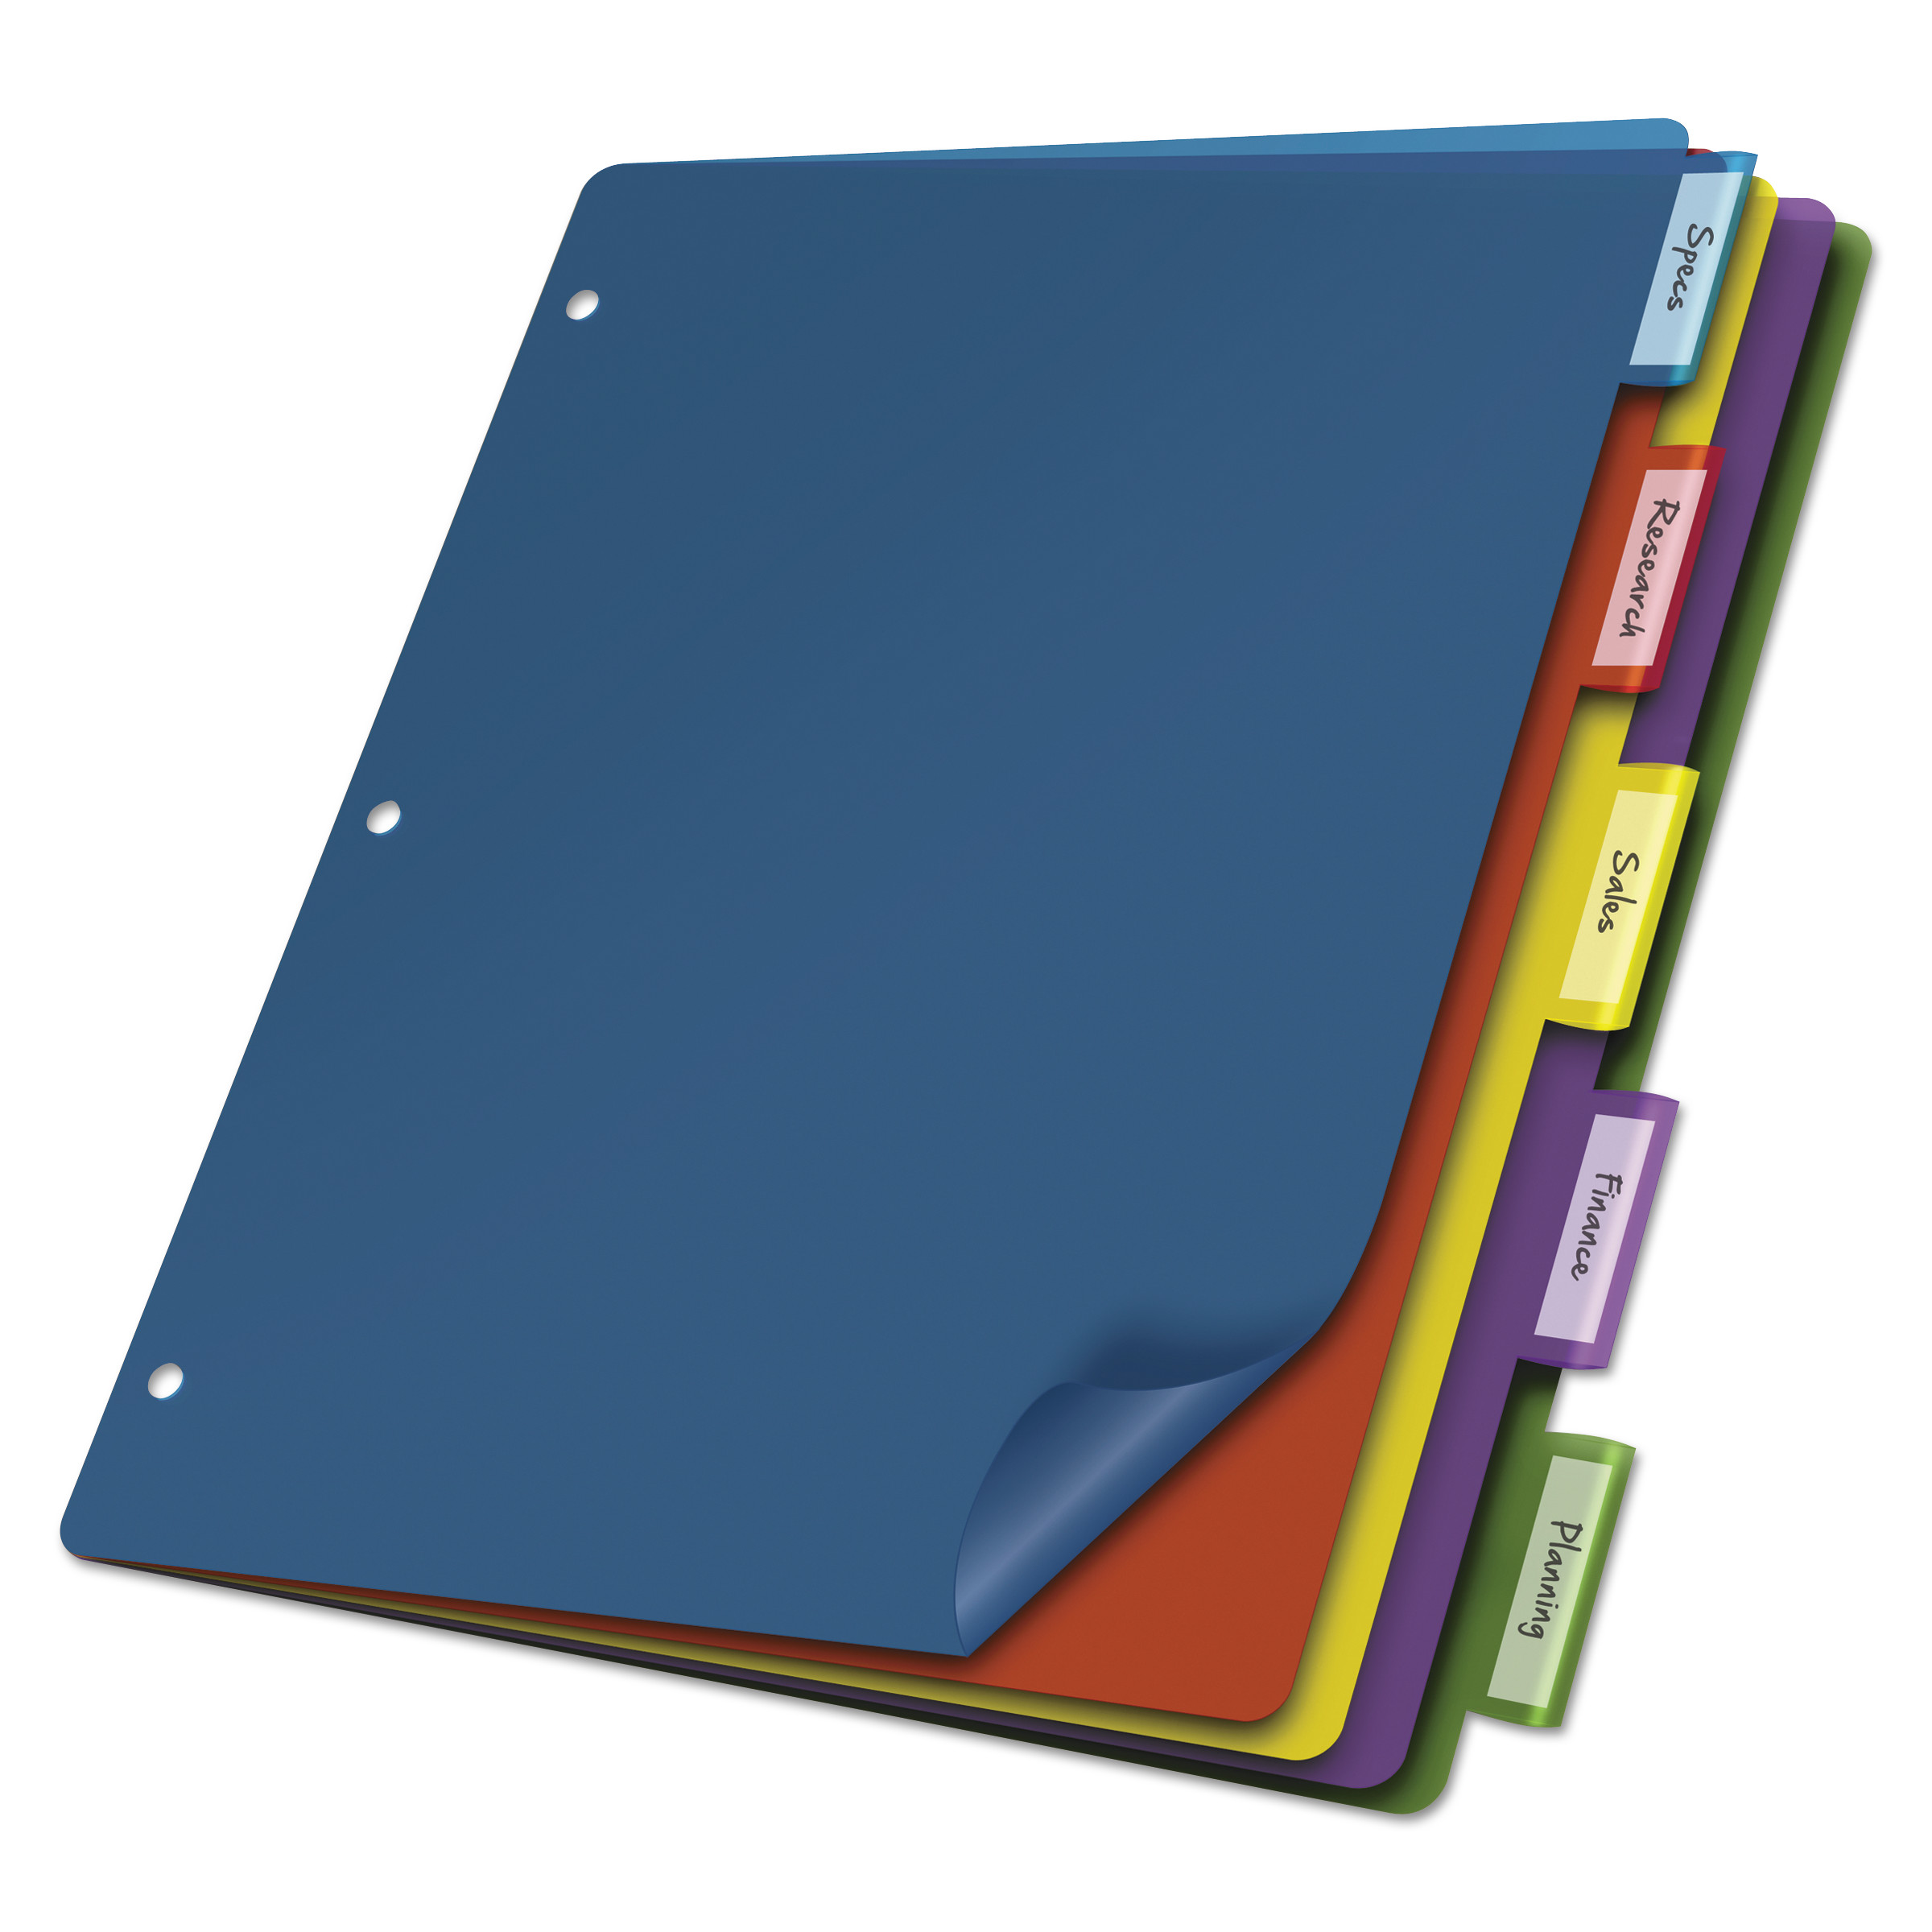  Cardinal 84018 Poly Index Dividers, 5-Tab, 11 x 8.5, Assorted, 4 Sets (CRD84018) 